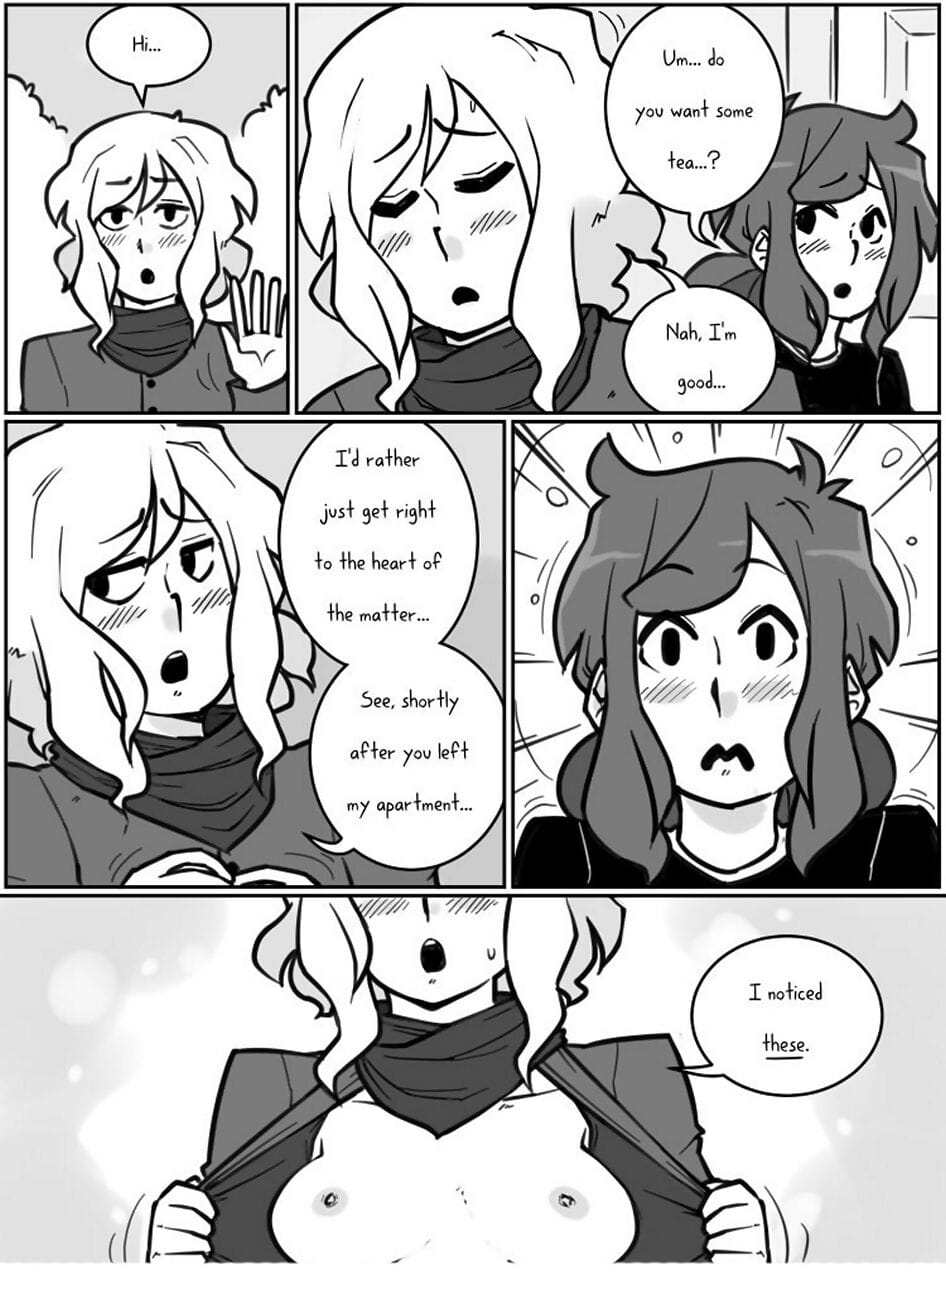 The Key To Her Heart 30 - Strange Side Eâ€¦ page 1